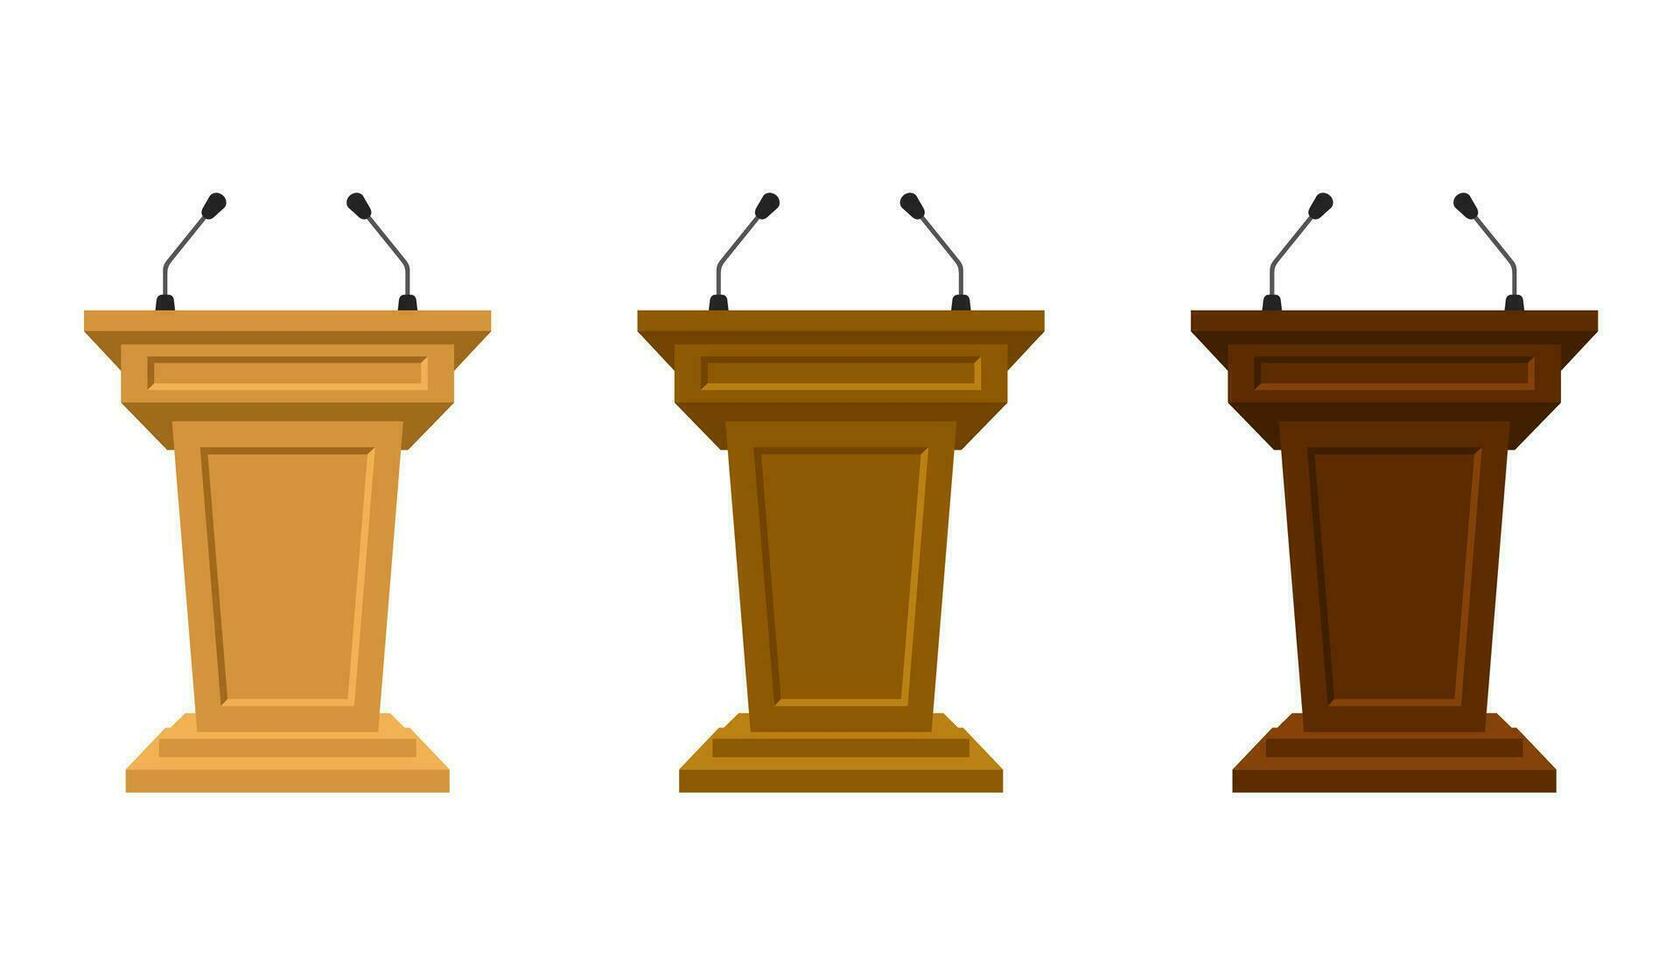 Wooden set of three colored tribunes stand rostrum with microphones. Podium or pedestal stand for speech or public pulpit for orator. Tribute for press conference or media, politics communication. vector